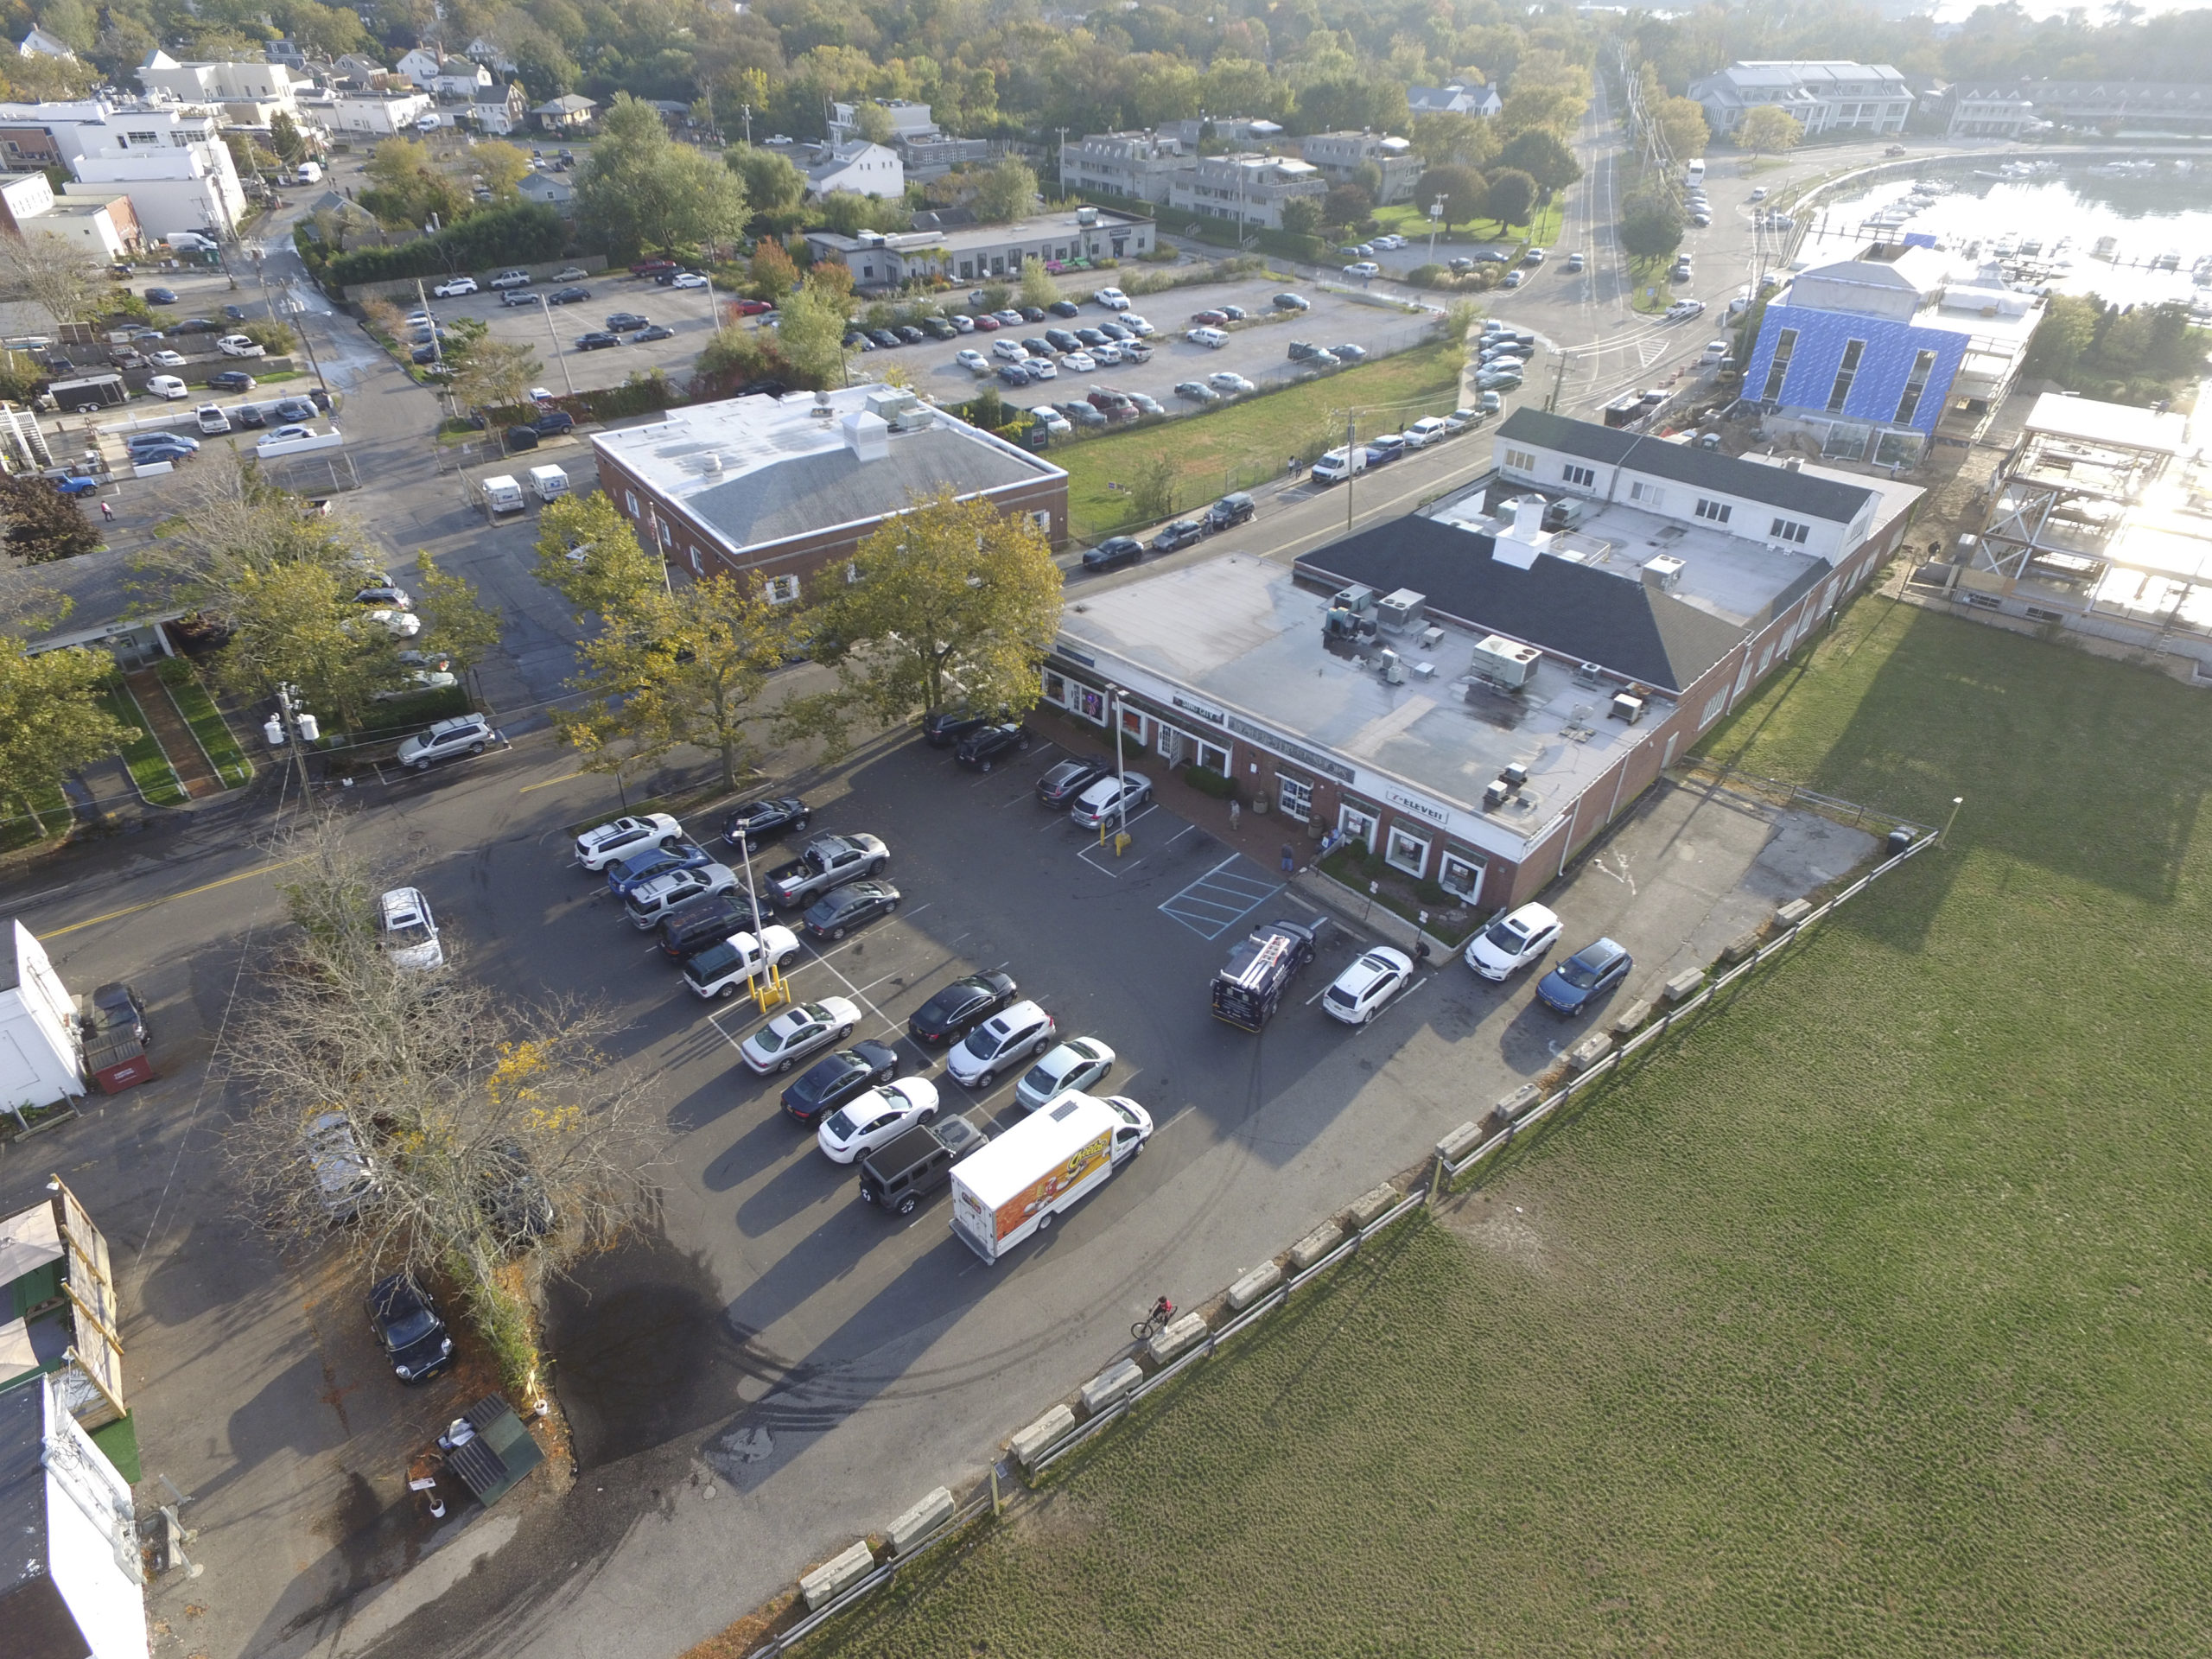 Sag Harbor Village wants the former gasball property as a municipal parking lot, putting it in competition with Bay Street Theater.